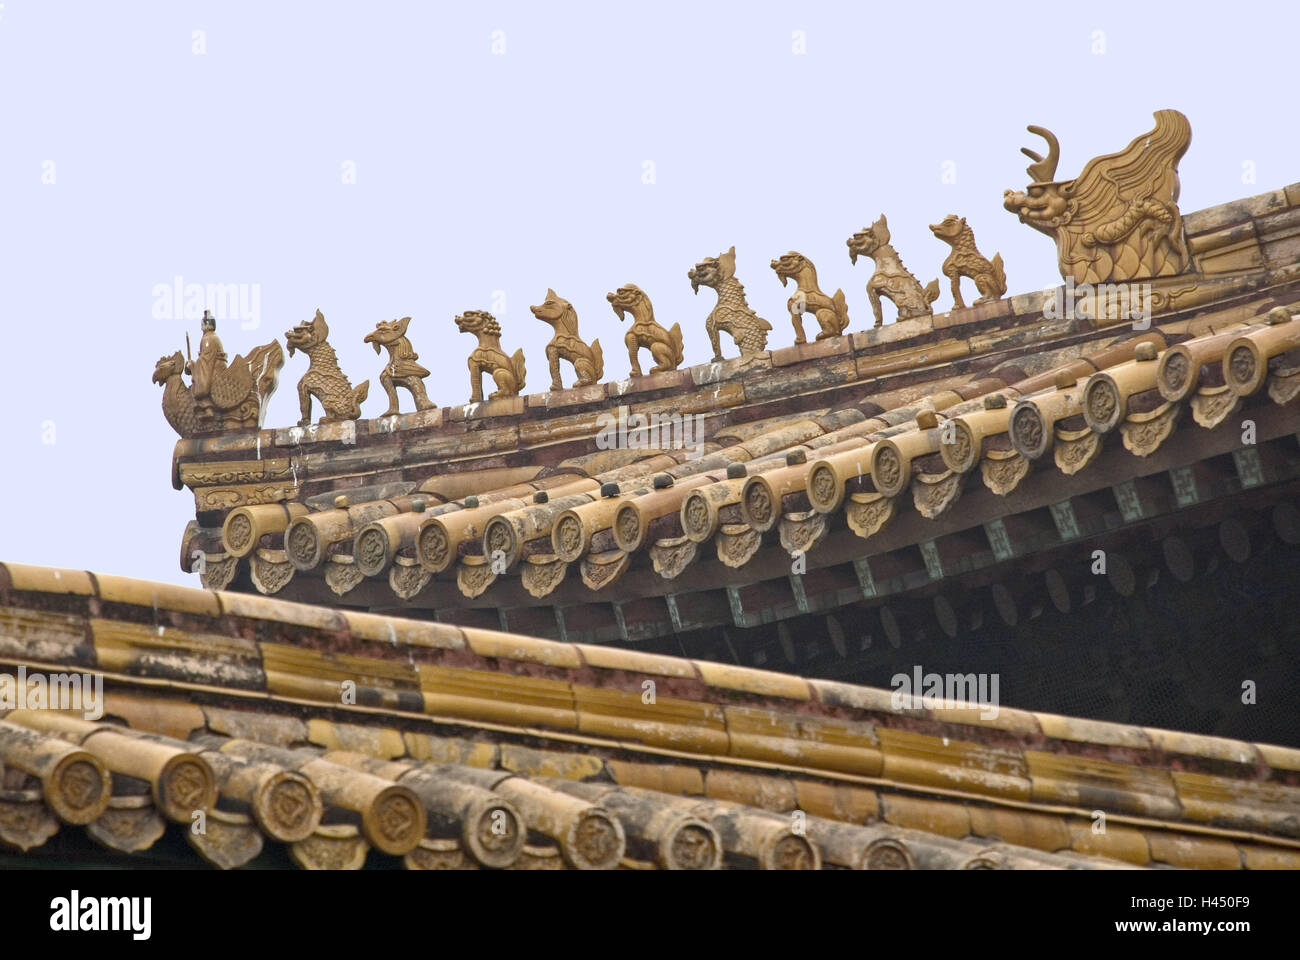 China, Peking, Forbidden City, imperial palace, detail, grace note, roof, dragon, golden, Asia, Eastern Asia, town, capital, palace, Gugong, culture, building, structure, architecture, place of interest, culture, tourism, art, figures, Stock Photo